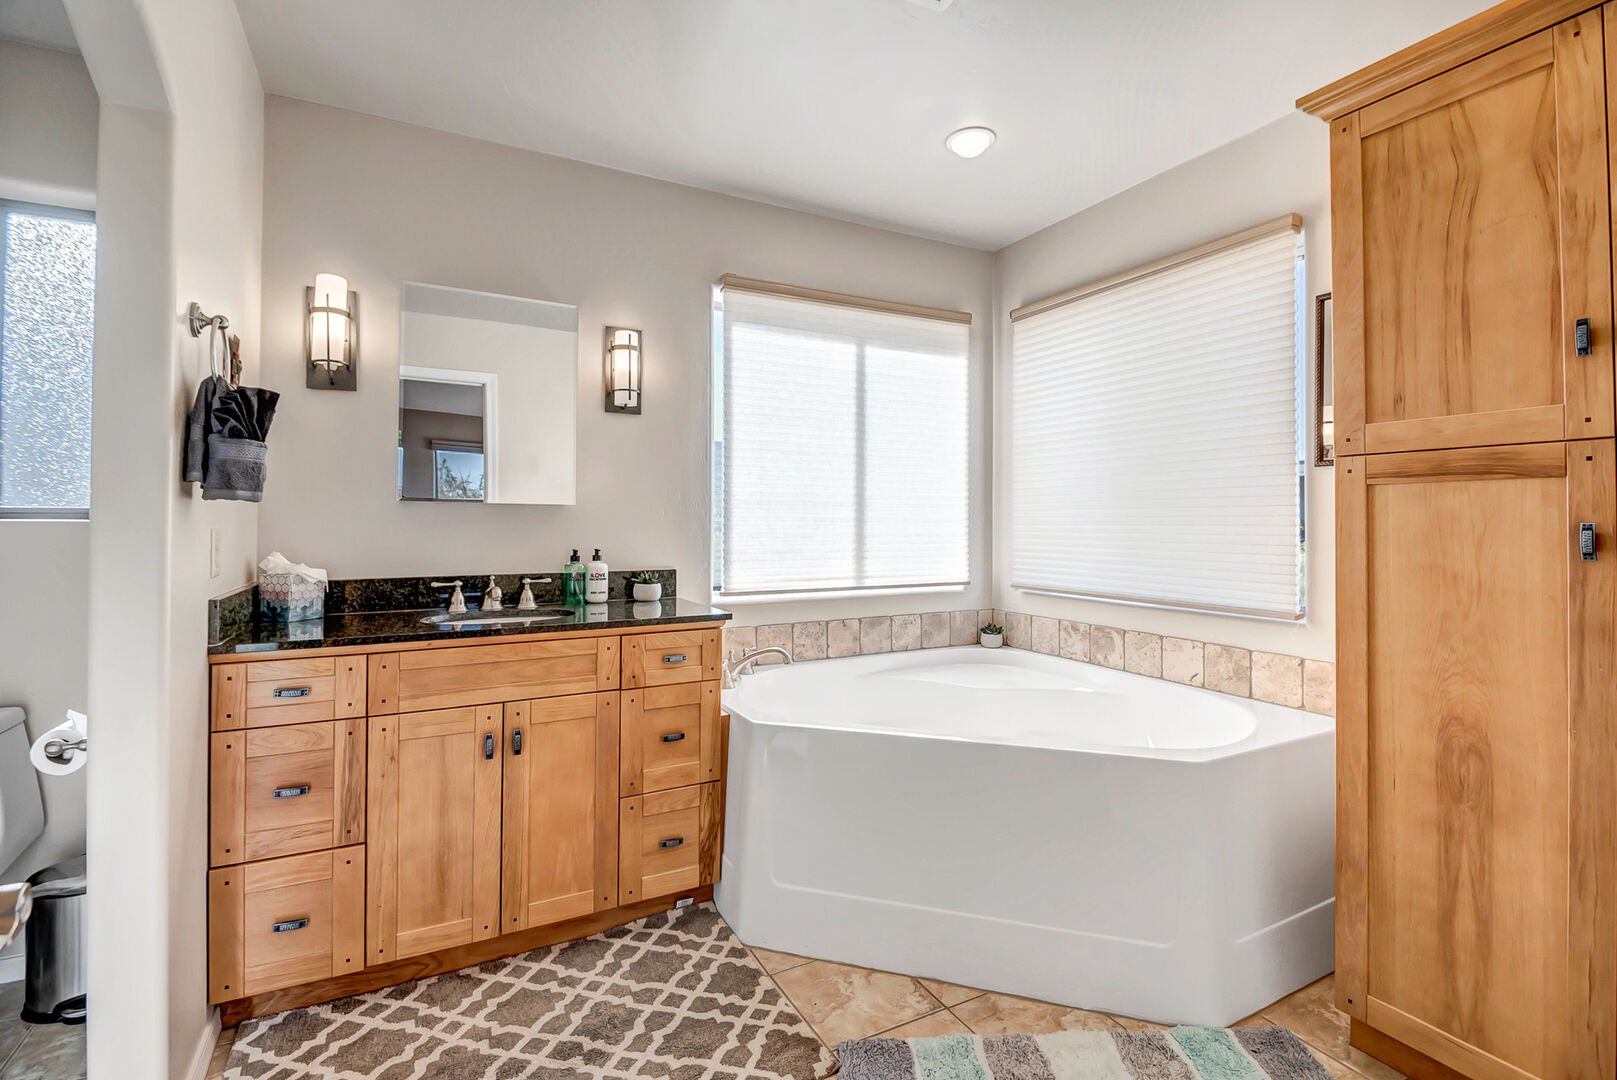 Master bathroom with single vanity, tub and separate shower